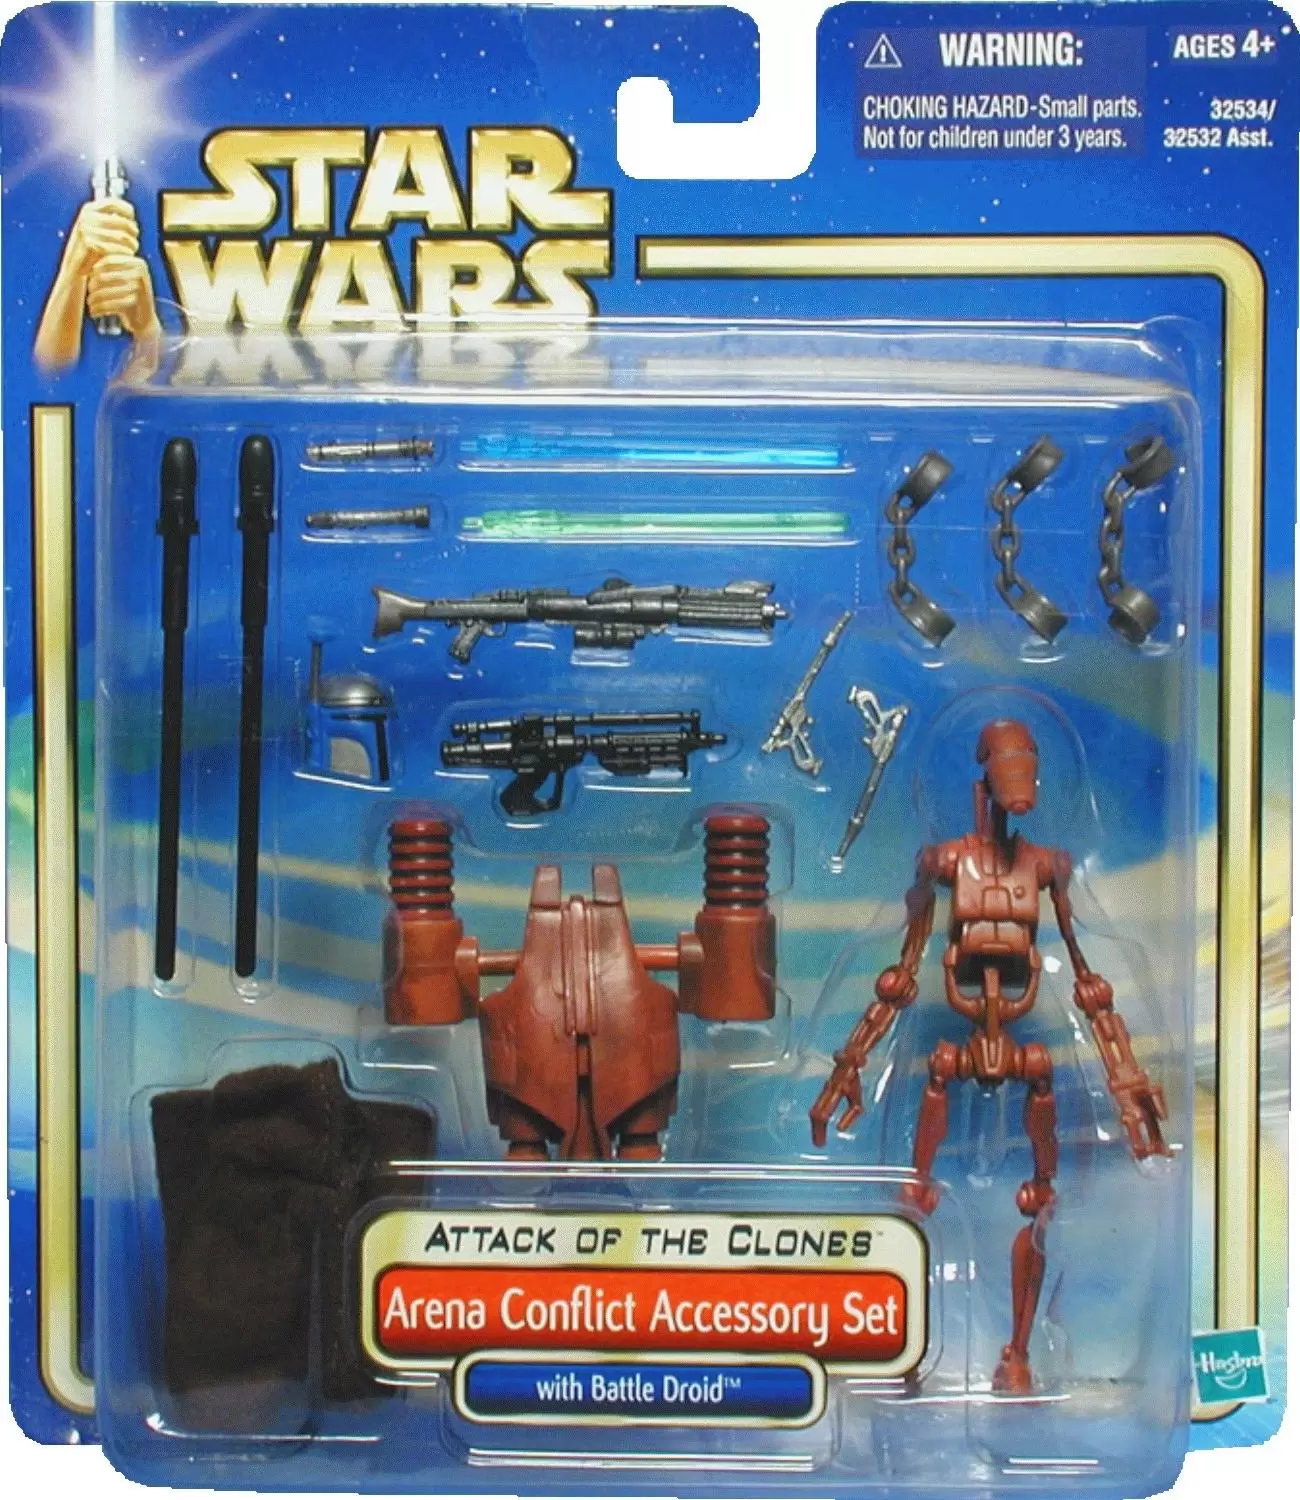 Star Wars SAGA - Arena Conflict Accessory Set (with battle droid)